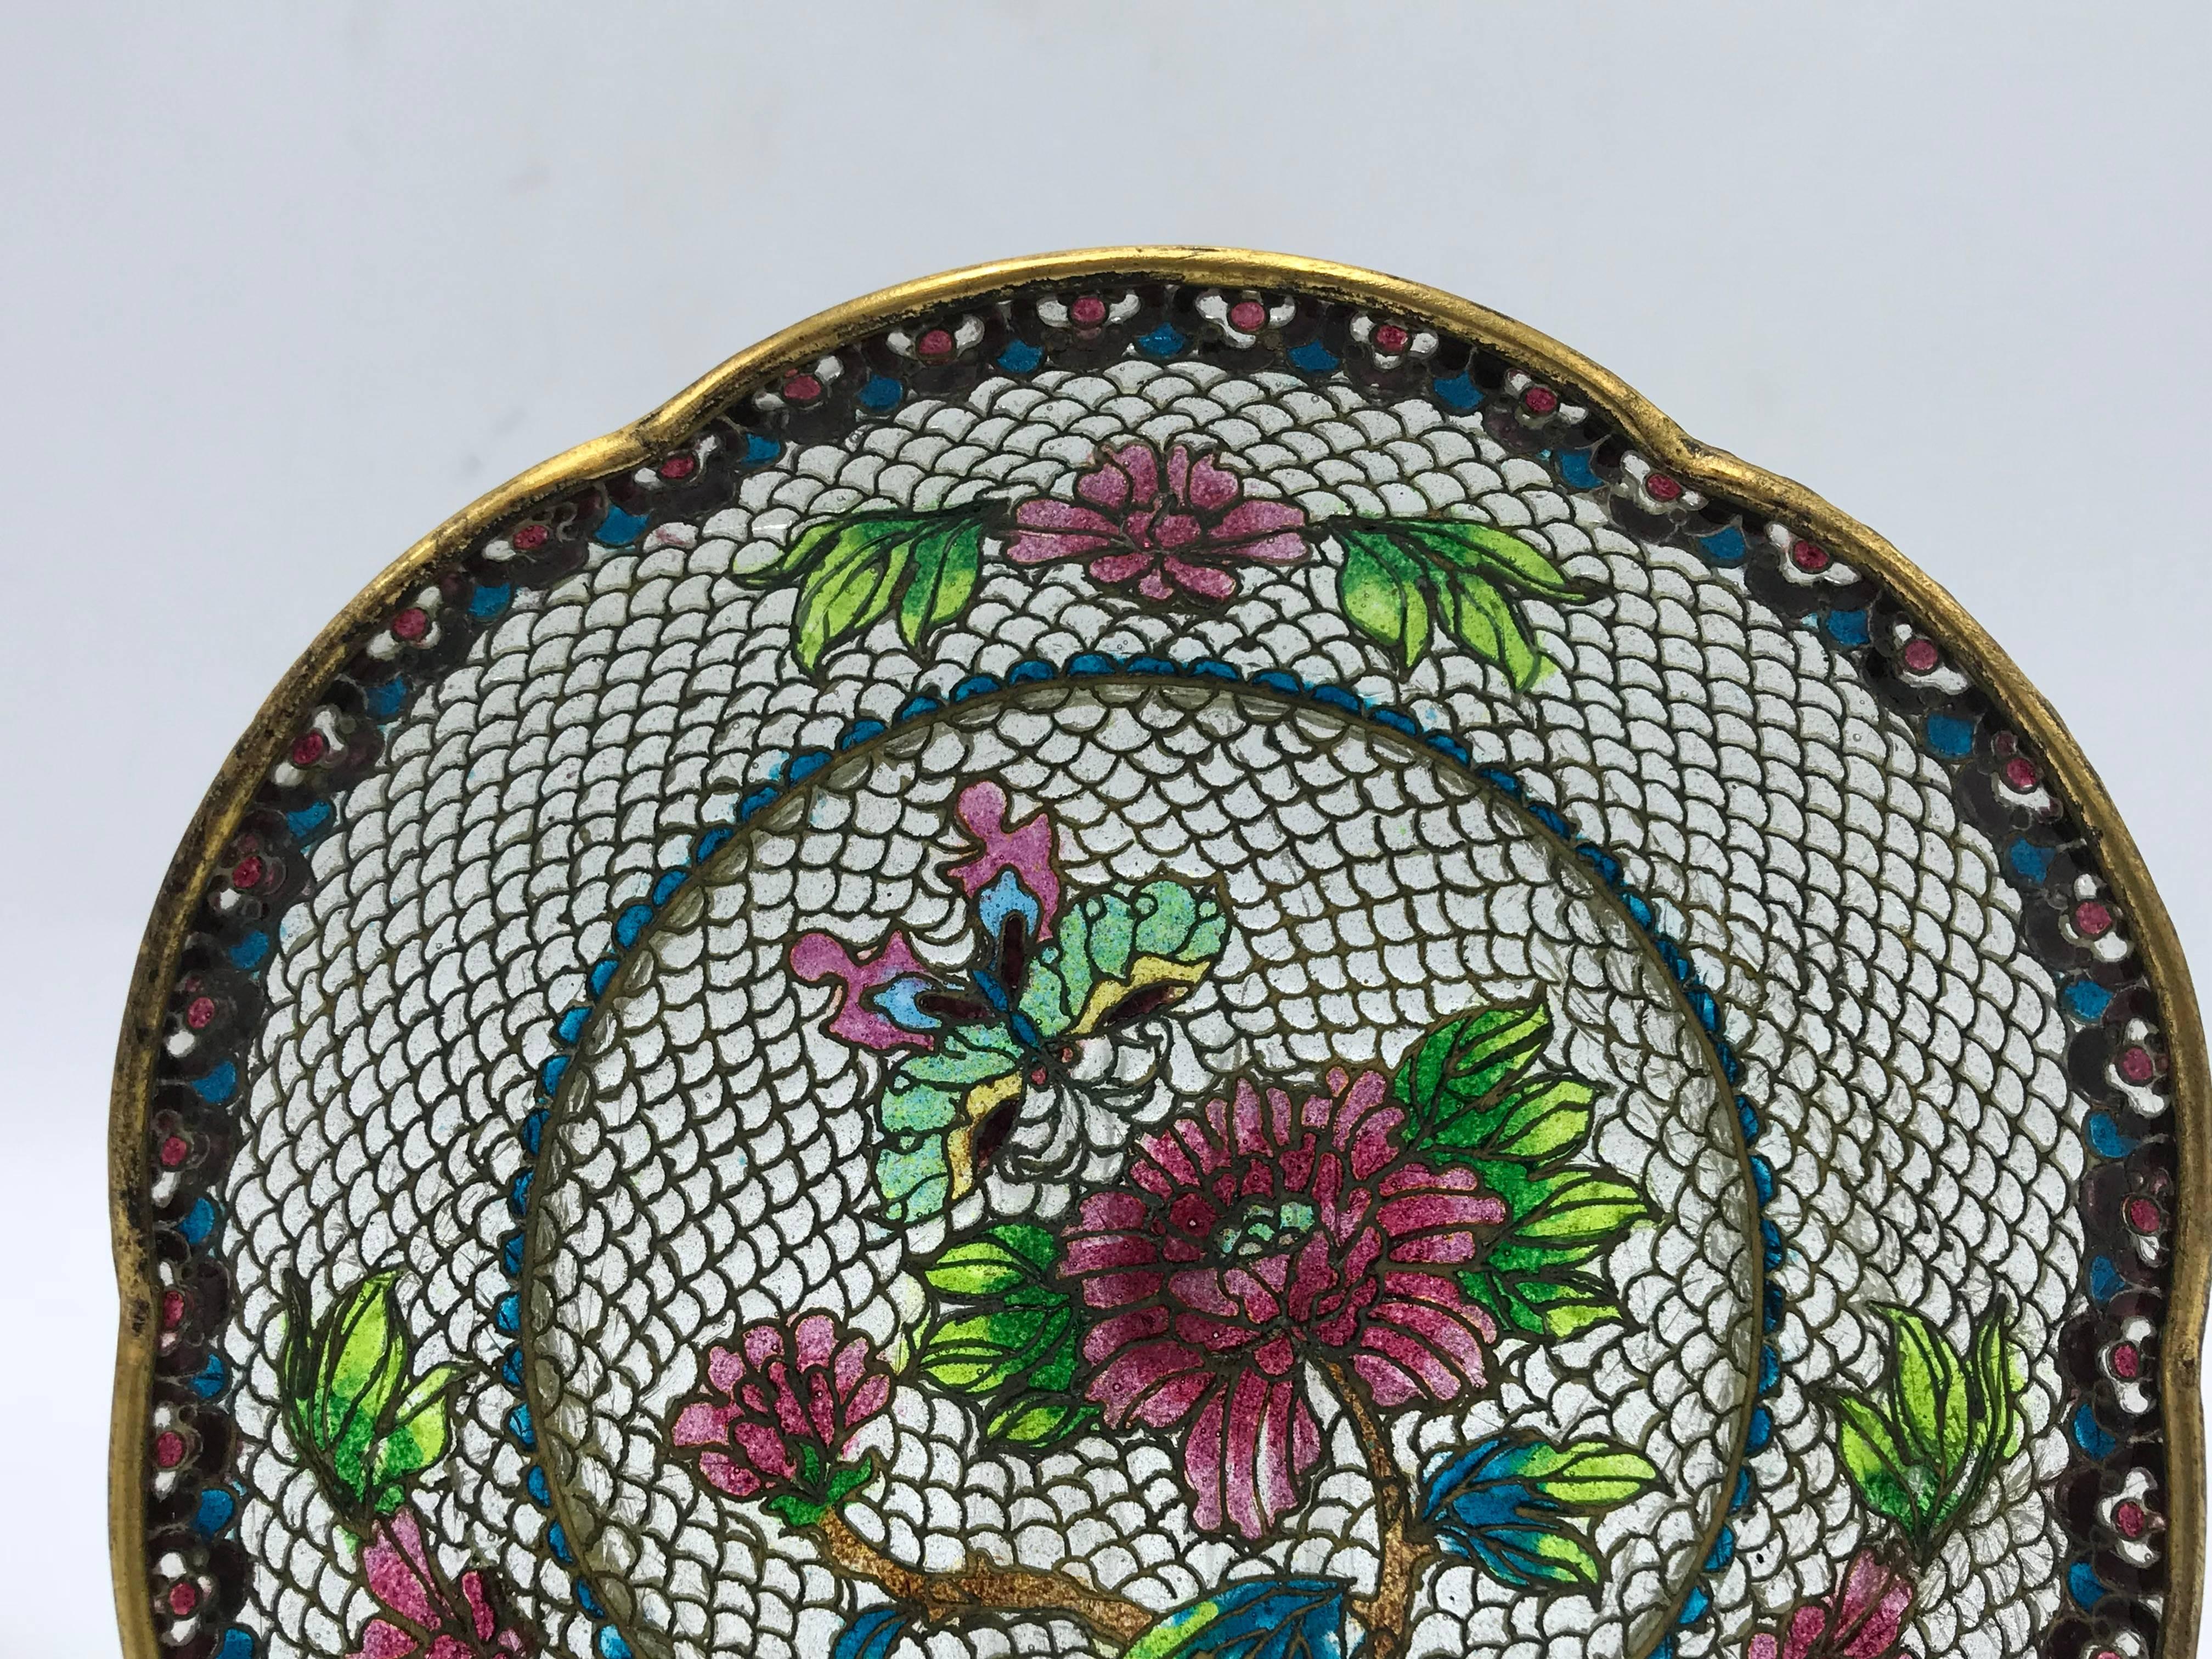 Offered is an exquisite, late 19th century French Art Nouveau, Plique a Jour cloisonné-enamel dish. The piece has a gorgeous butterfly and floral-inlaid motif all over.